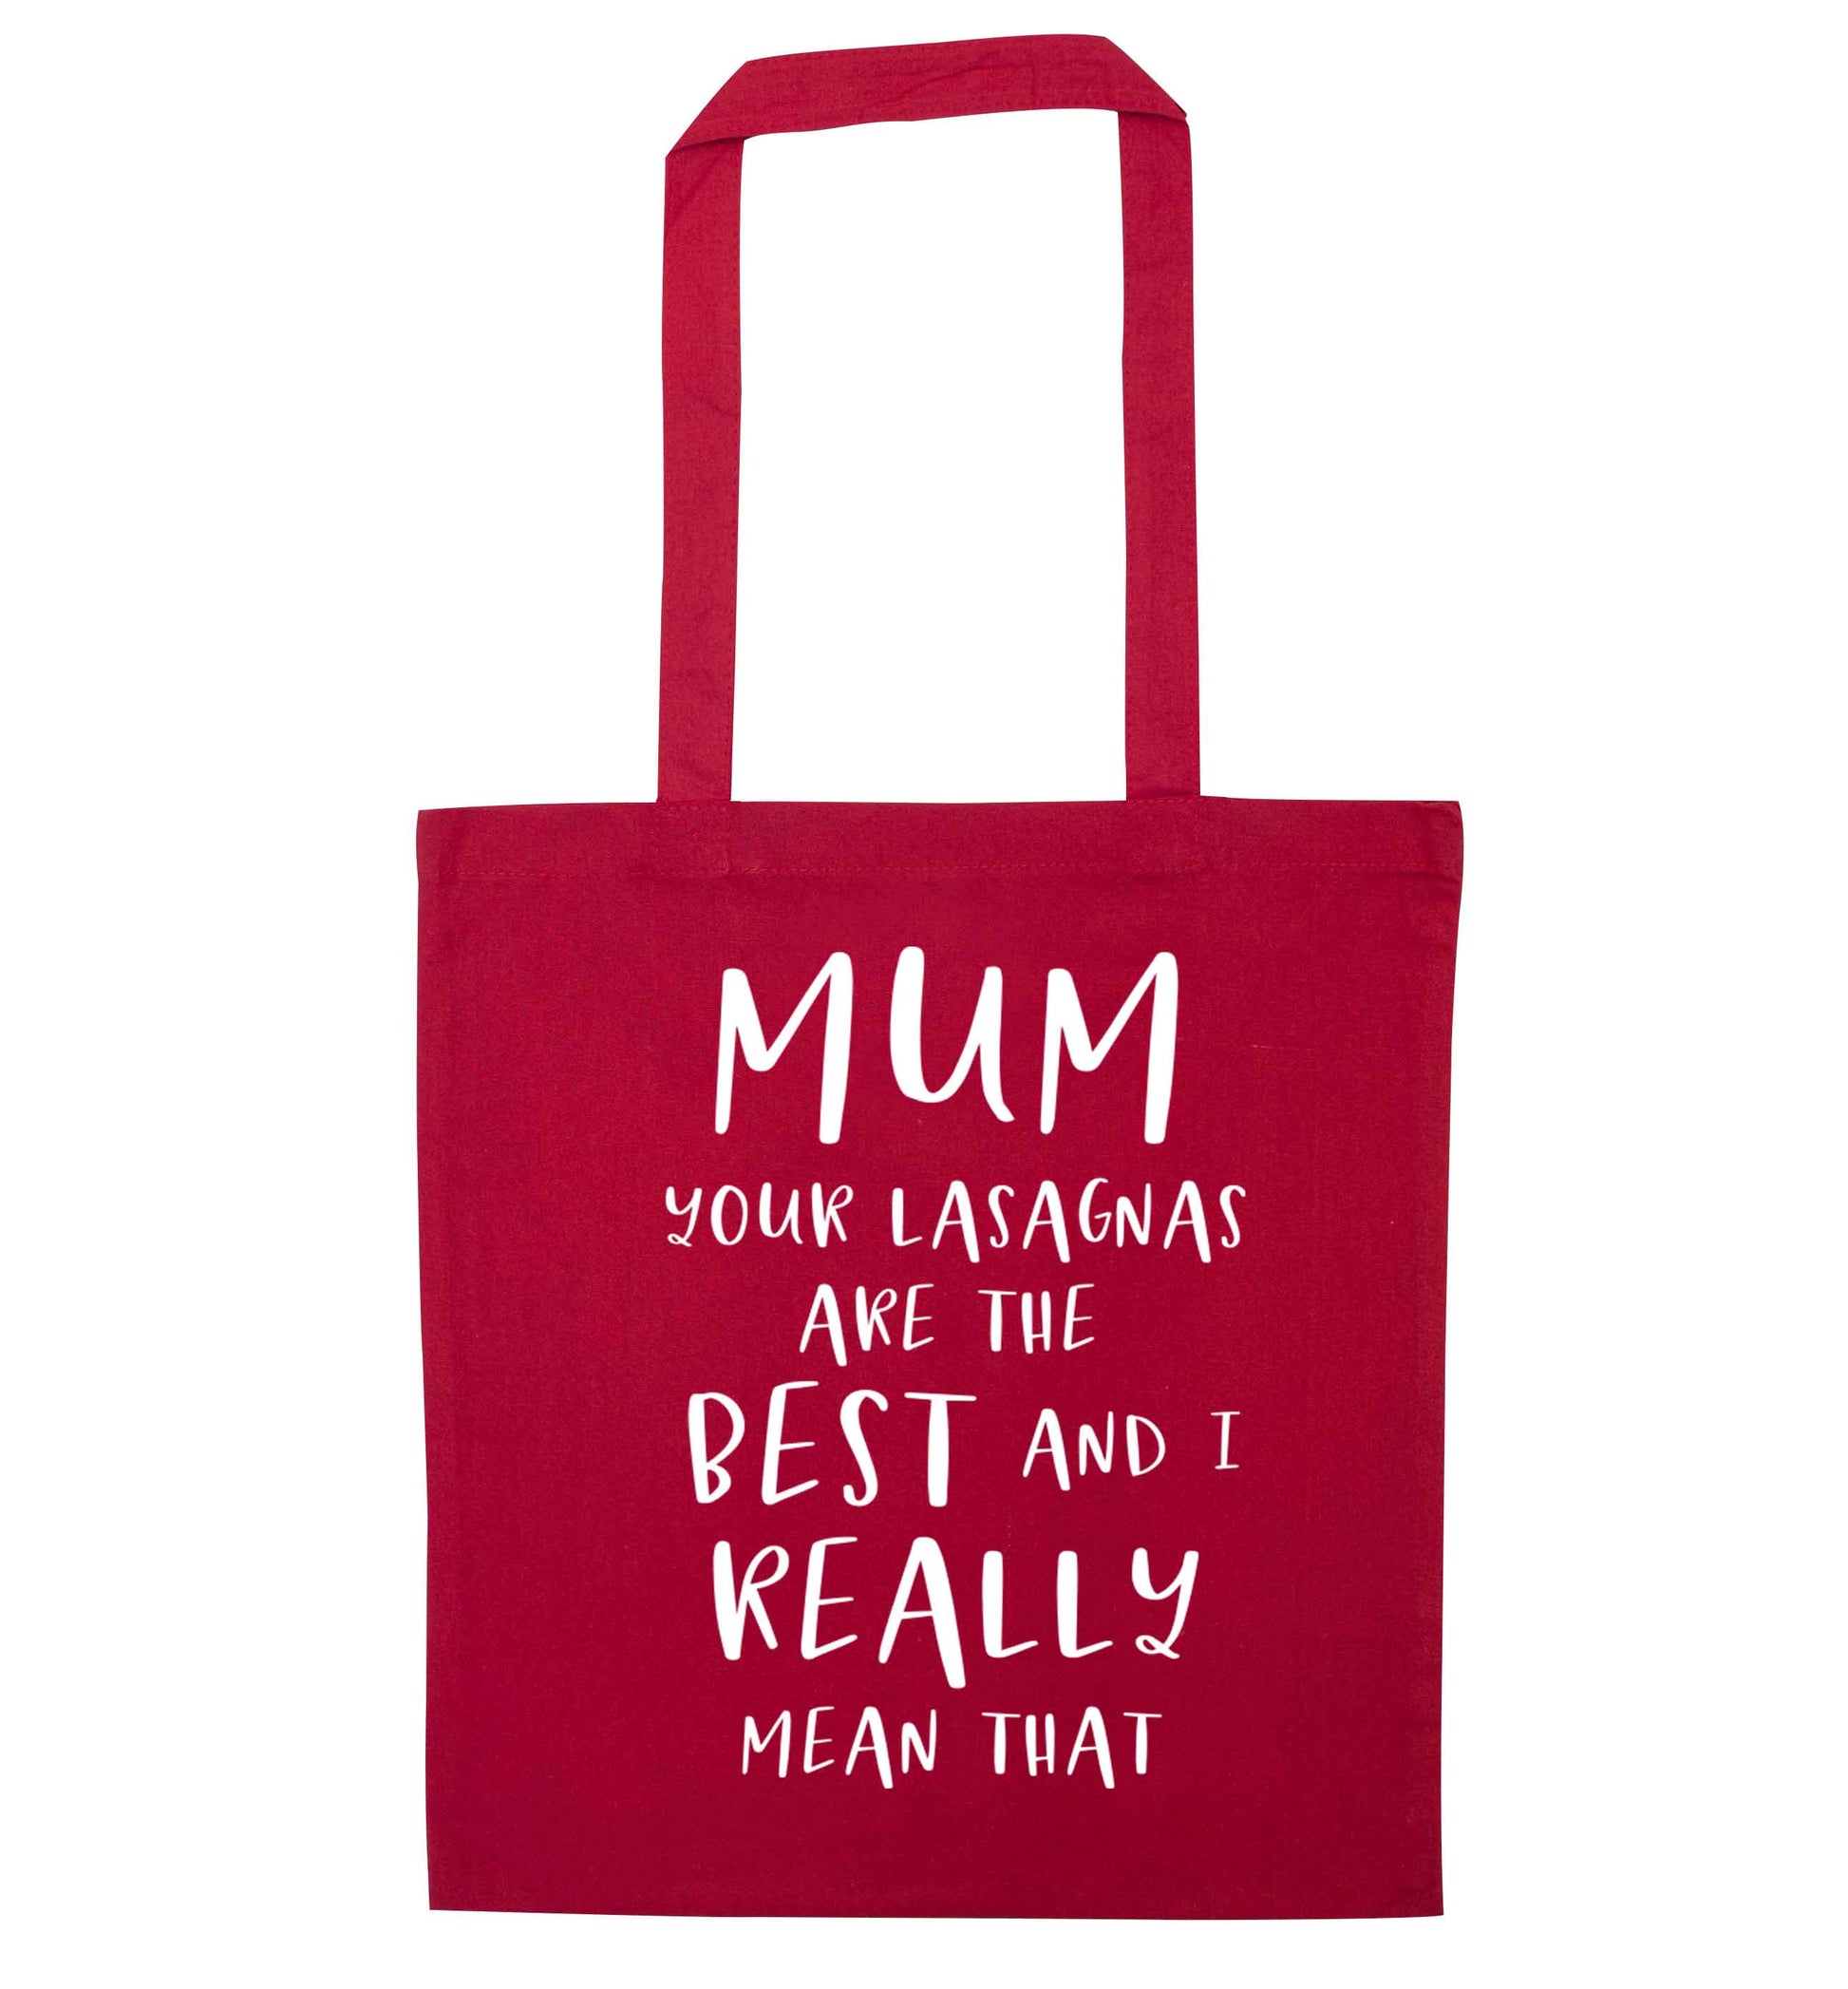 Funny gifts for your mum on mother's dayor her birthday! Mum your lasagnas are the best and I really mean that red tote bag